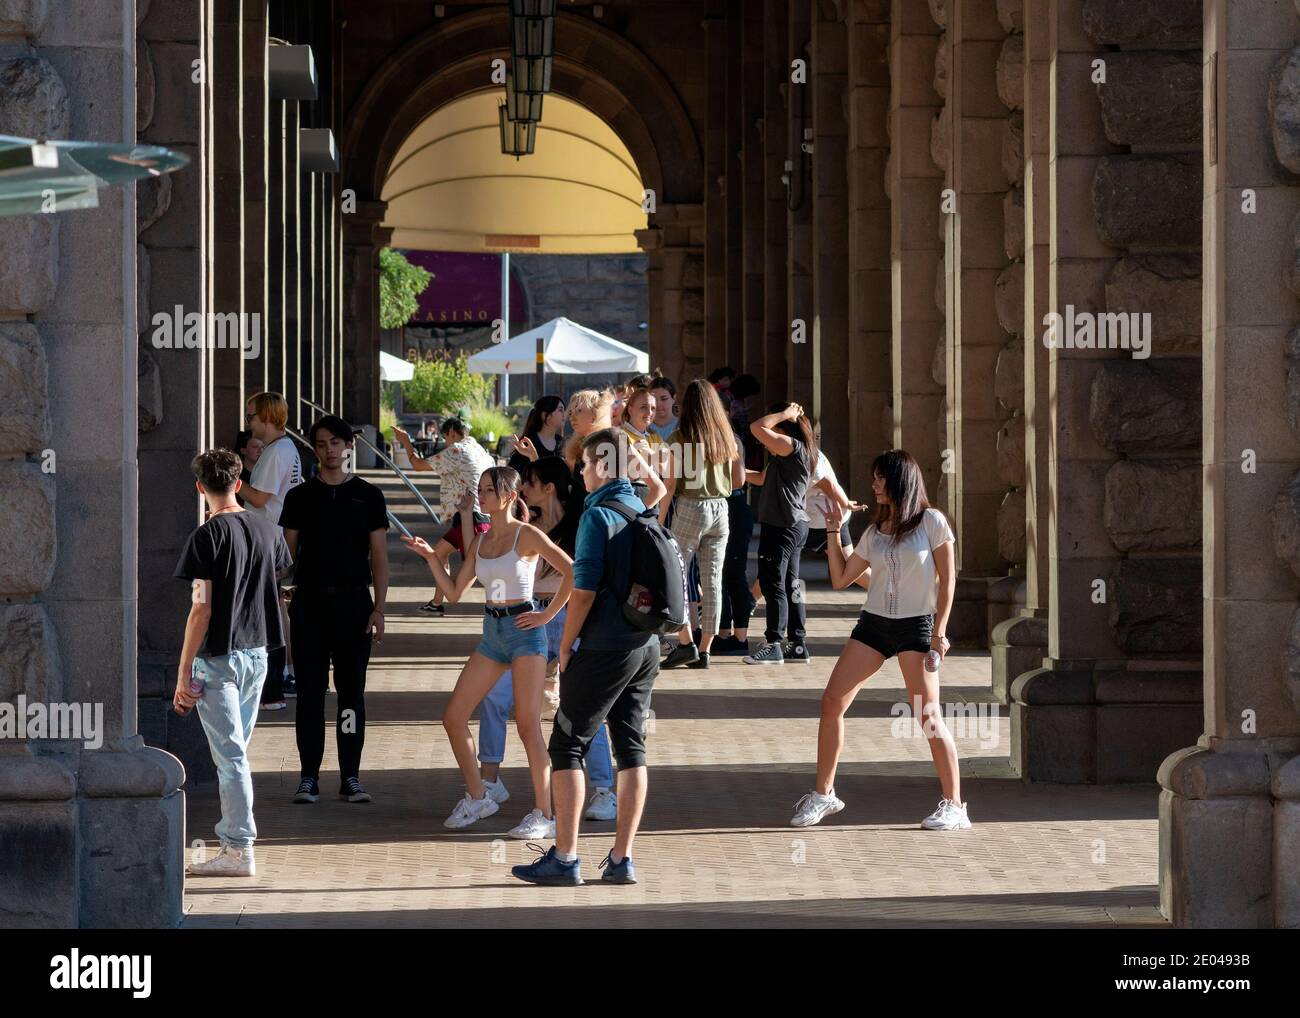 Group of teenagers and K-pop culture fans hanging out at the Largo as a popular spot for outdoor dancing in central Sofia Bulgaria EU Eastern Europe Stock Photo